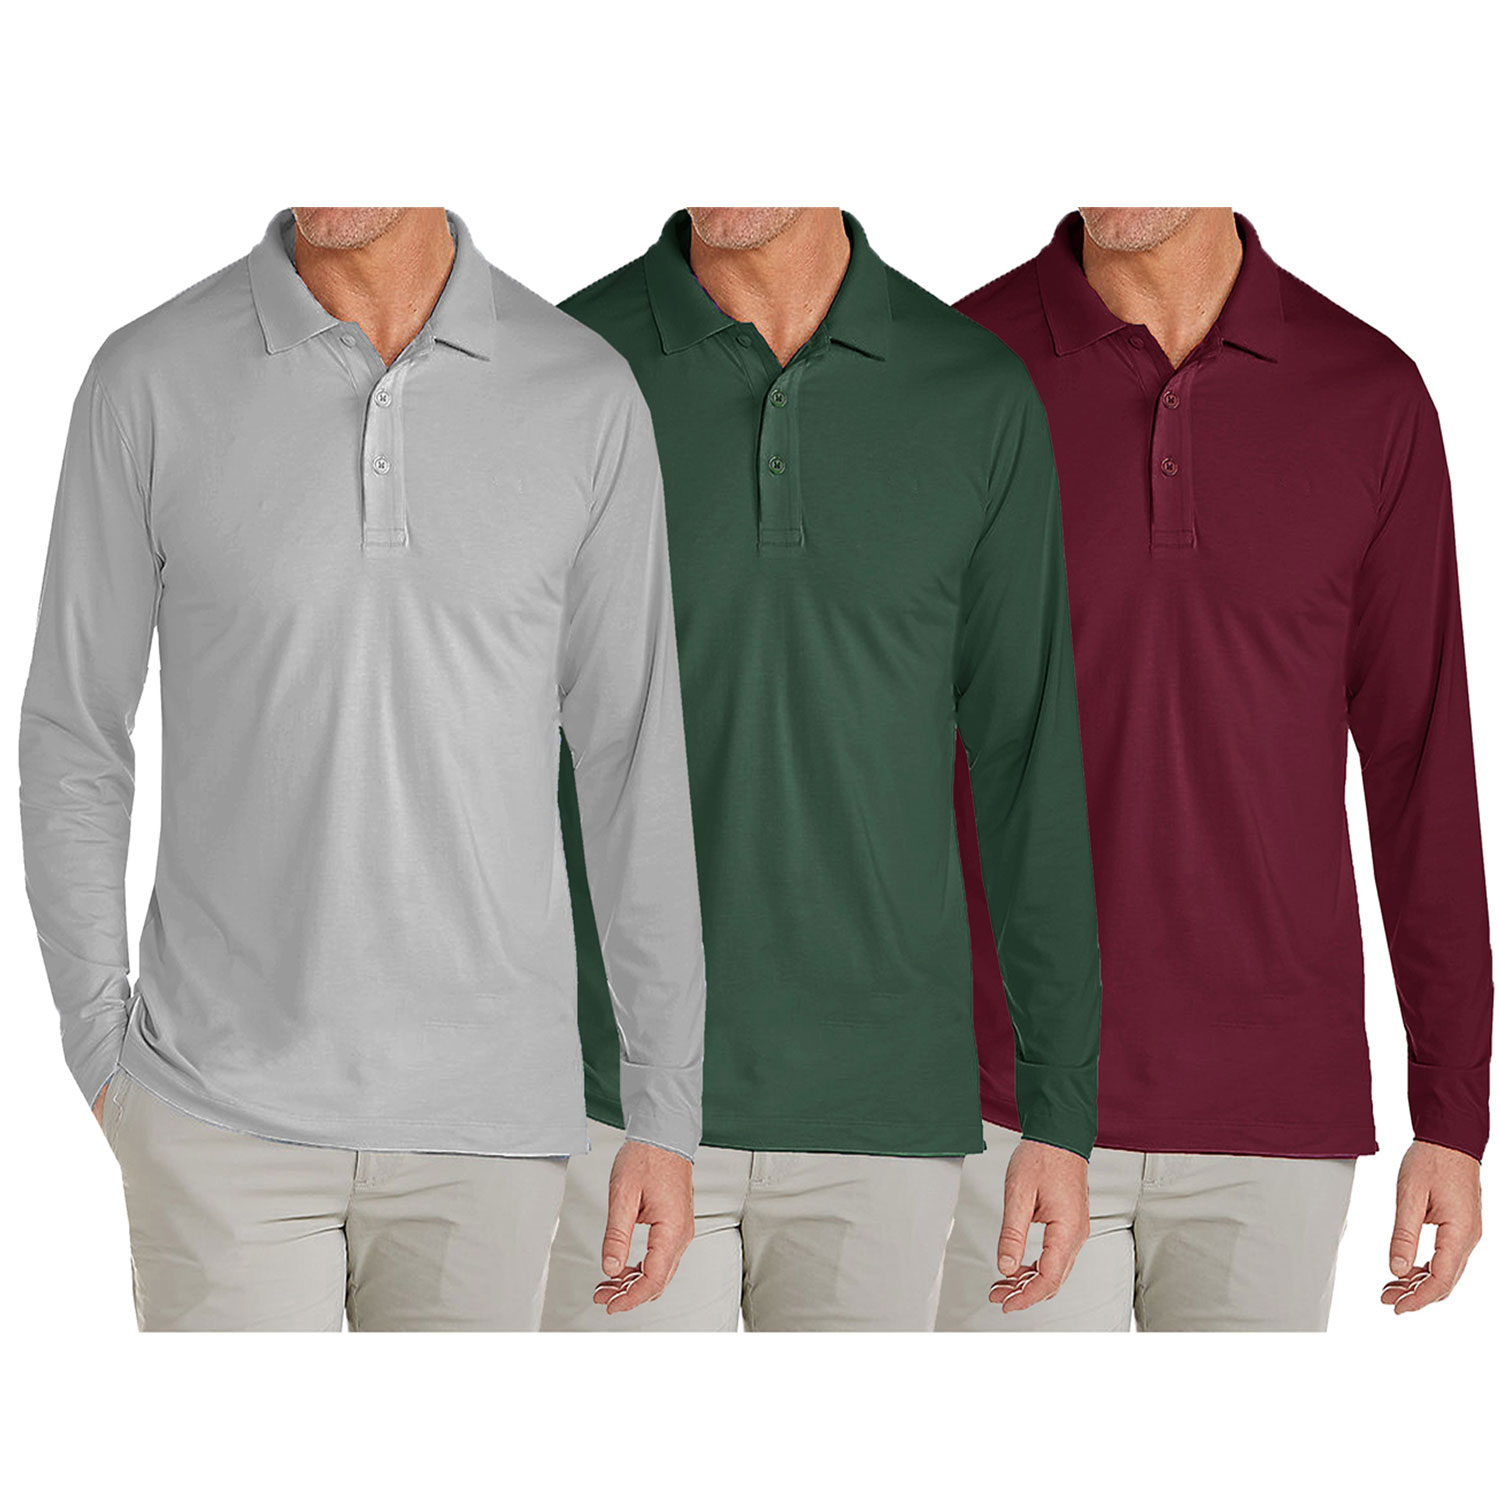 3 Pack Men's Long Sleeve Pique Polo Shirts